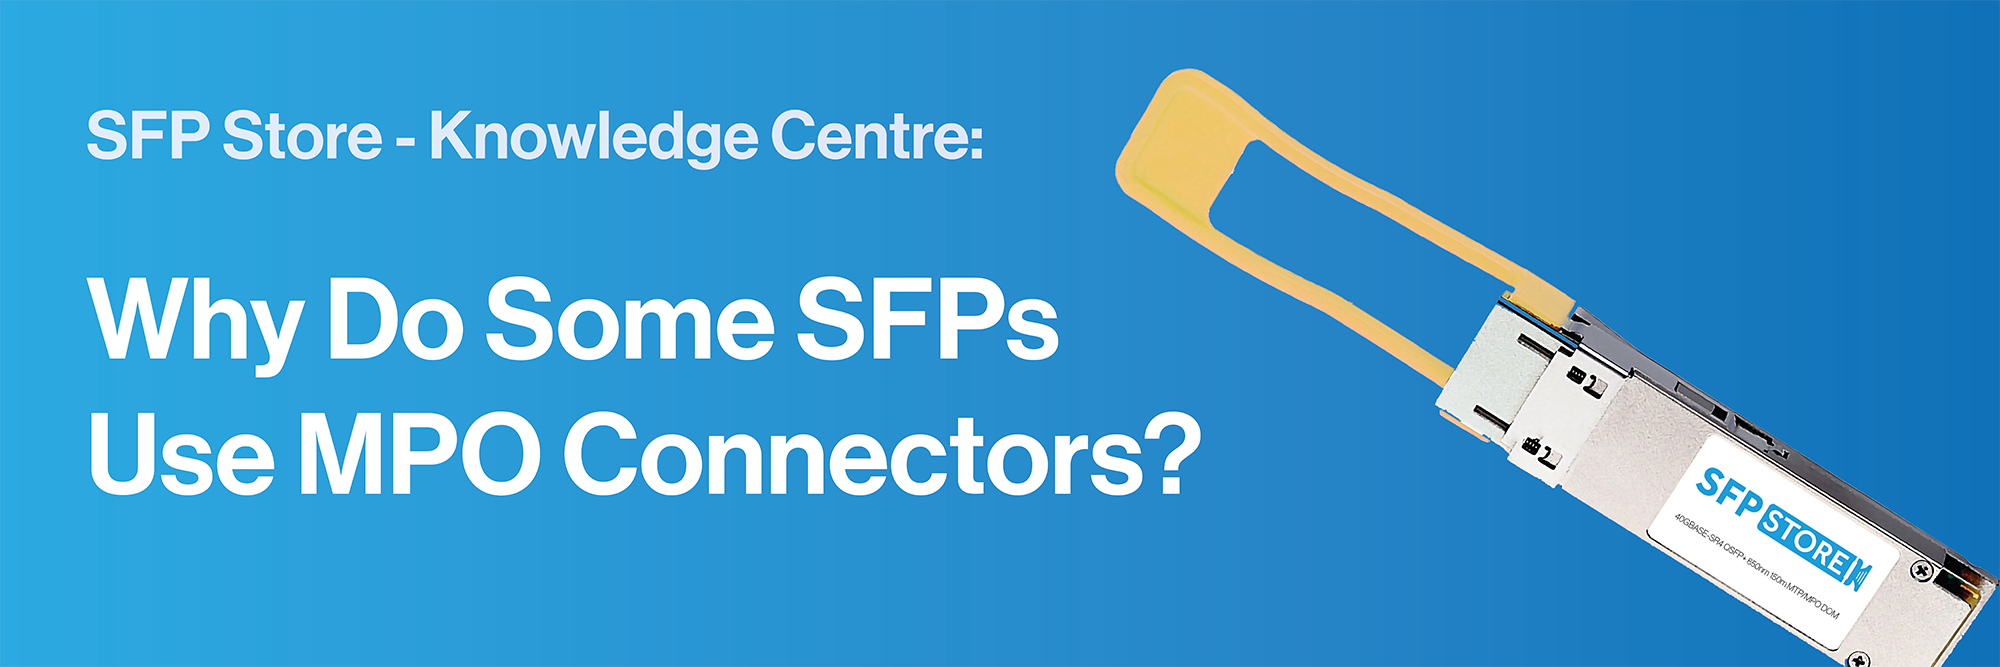 Why Do Some SFPs Use MPO Connectors?